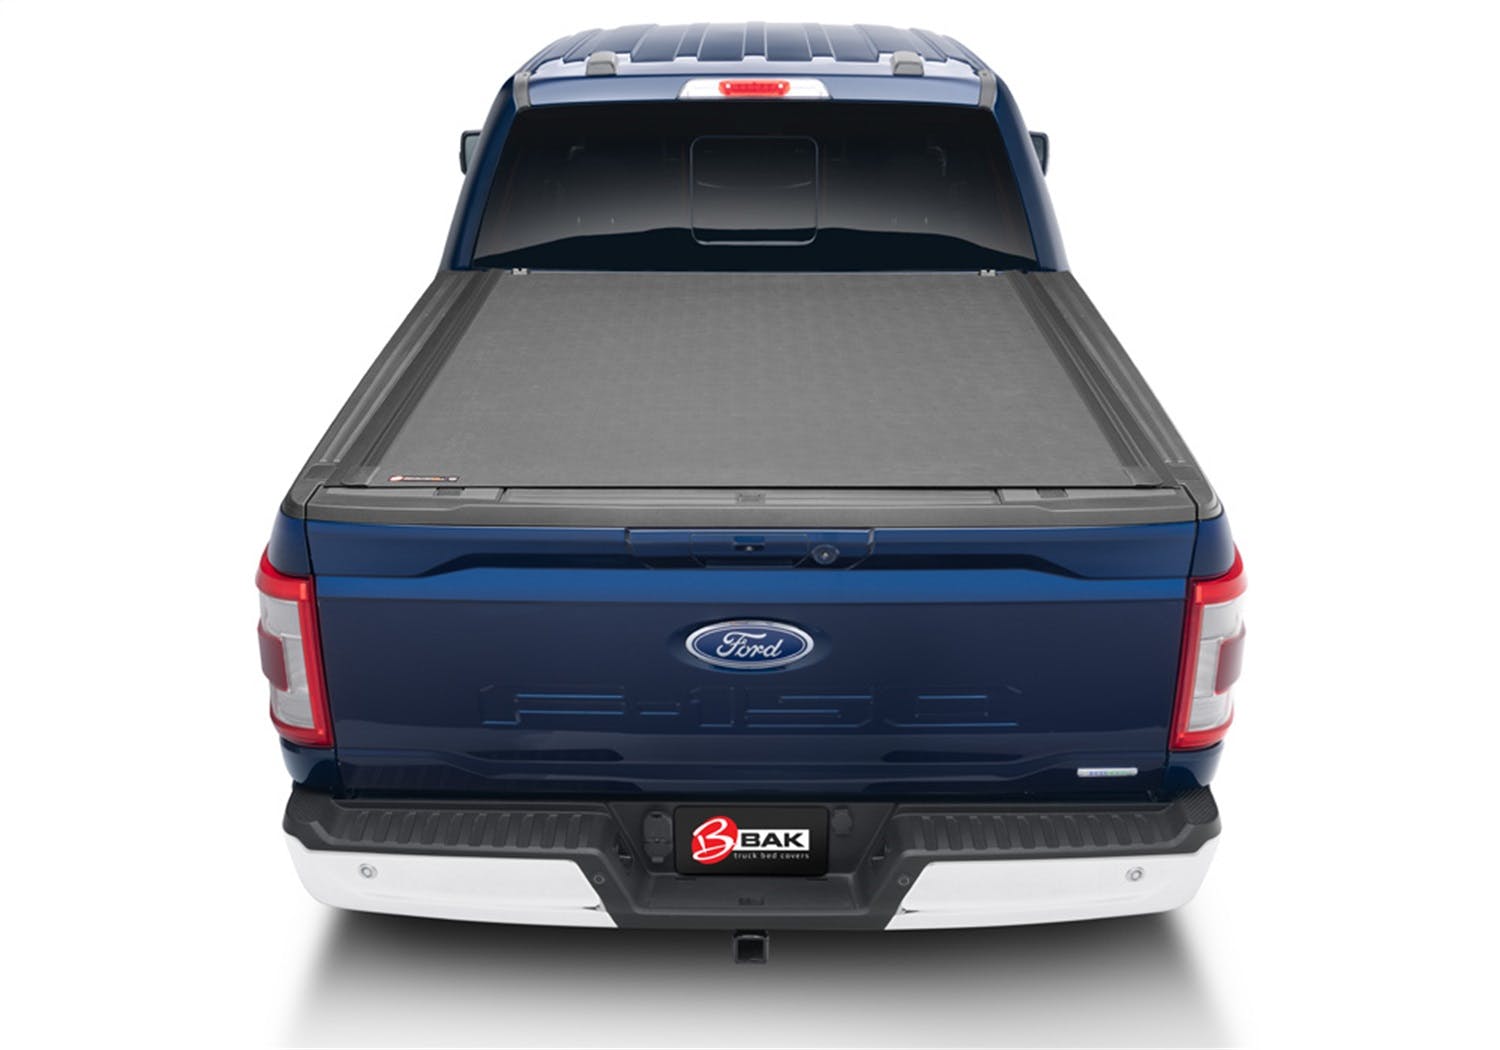 BAK Industries 80339 Revolver X4s Hard Rolling Truck Bed Cover